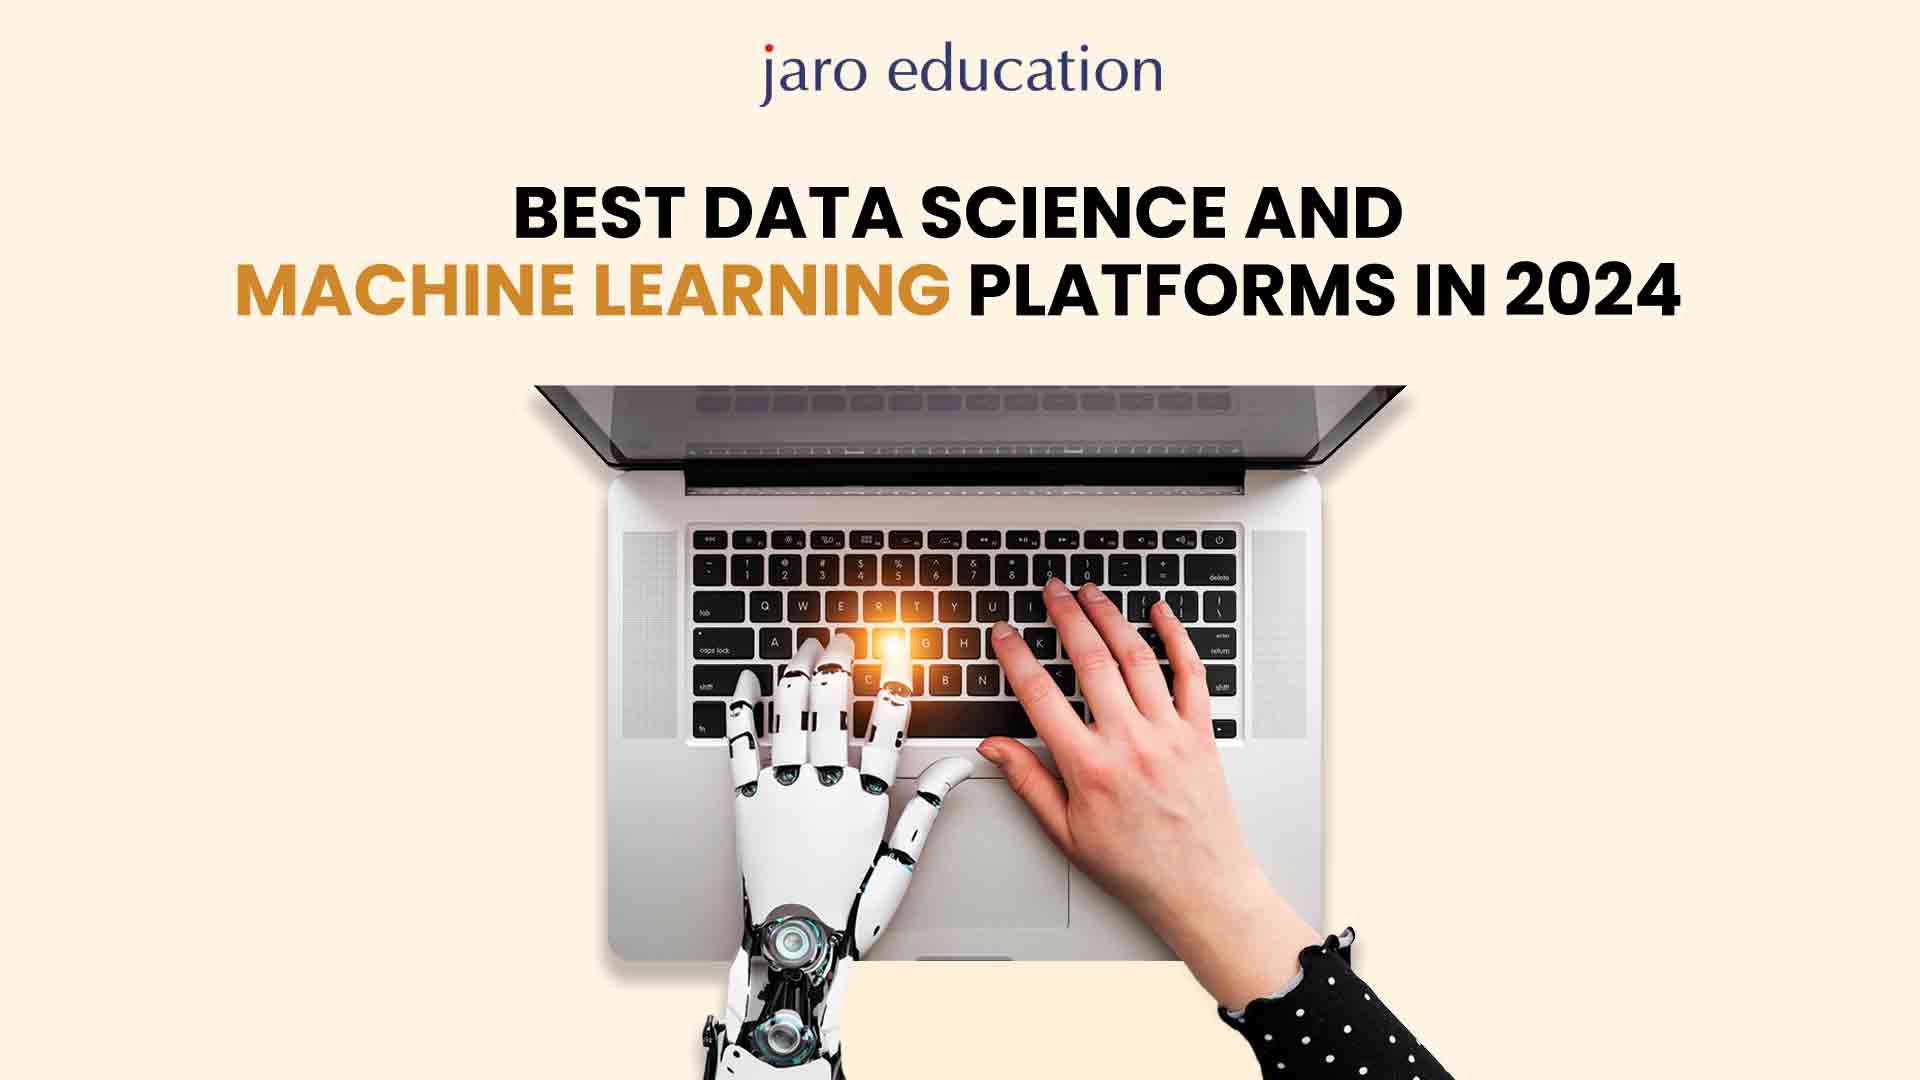 Best Data Science and Machine Learning Platforms in 2024